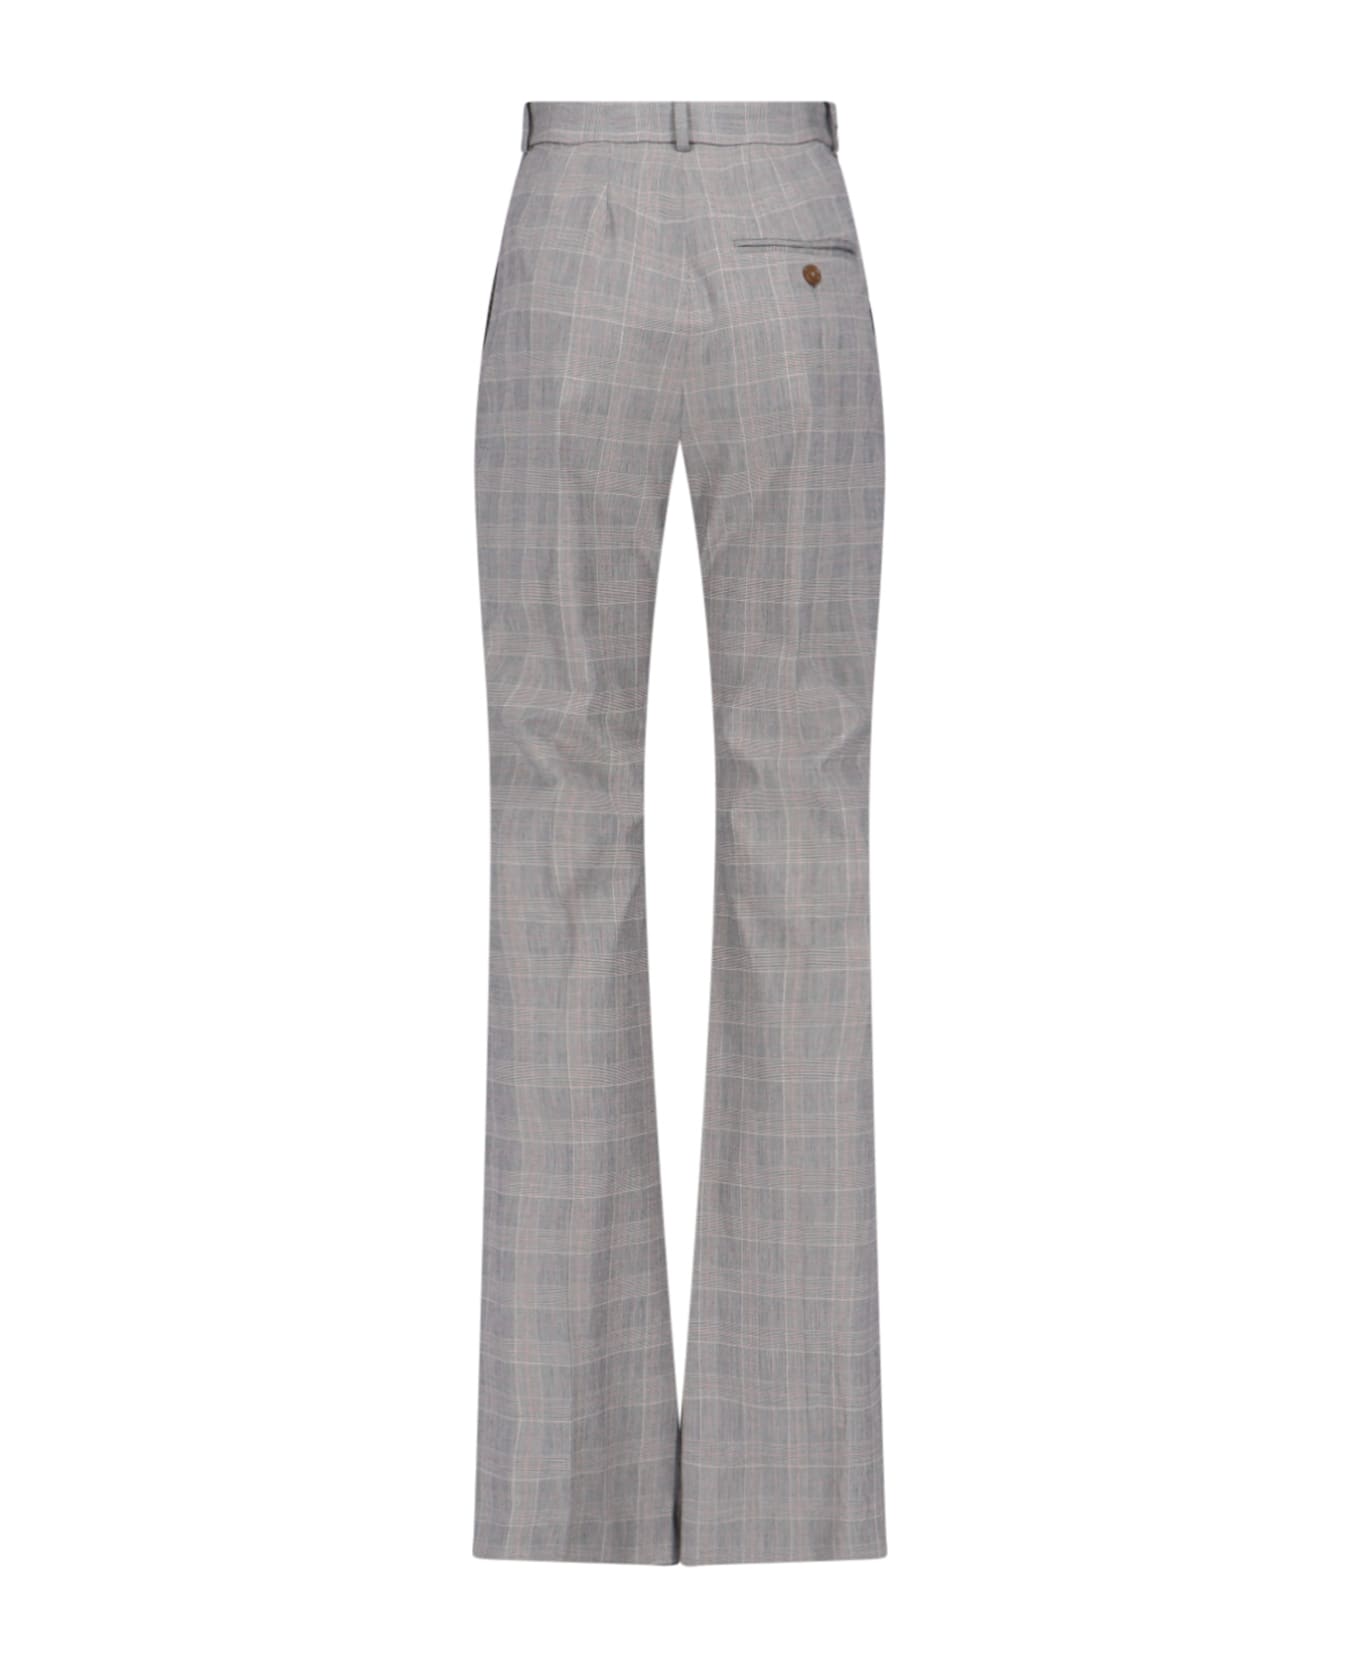 Vivienne Westwood 'ray' Bootcut Trousers - Gray